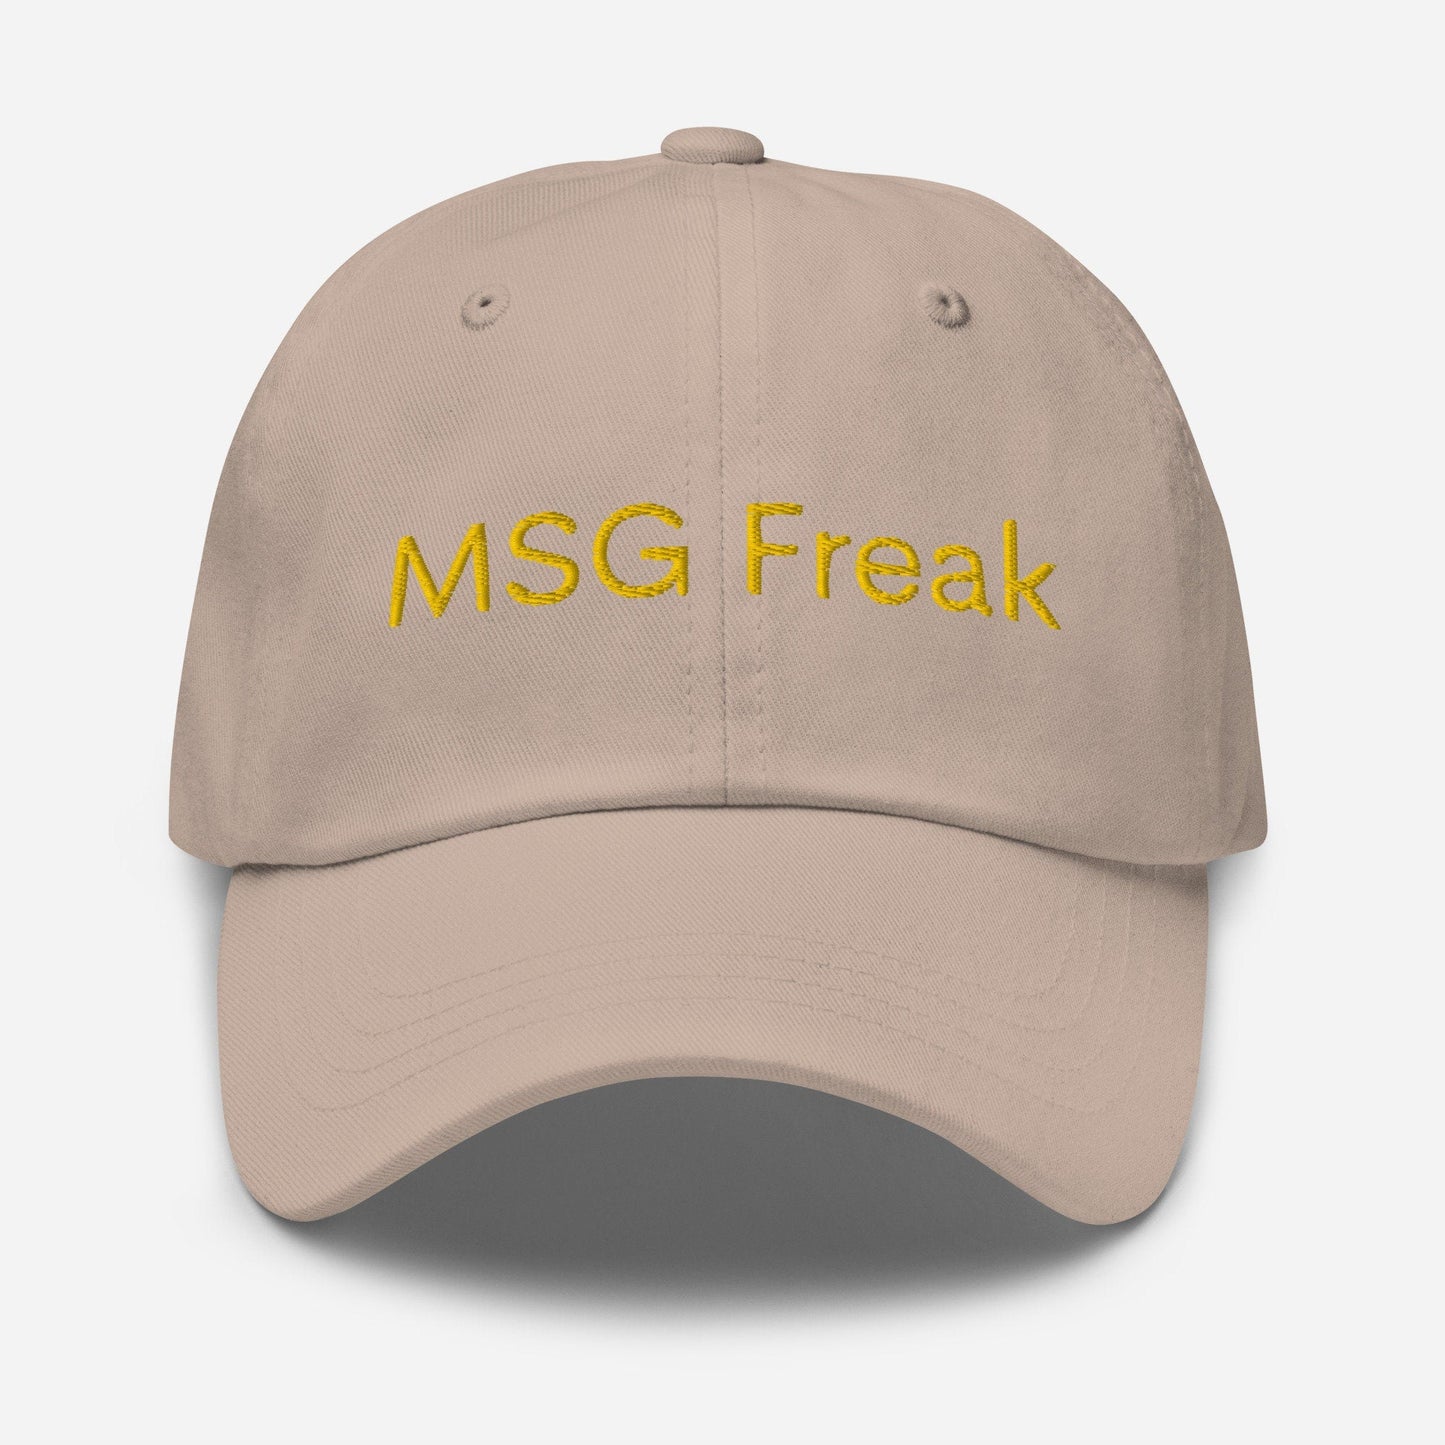 MSG Dad Hat - Gift for food lovers and home cook - Embroidered Cotton Cap